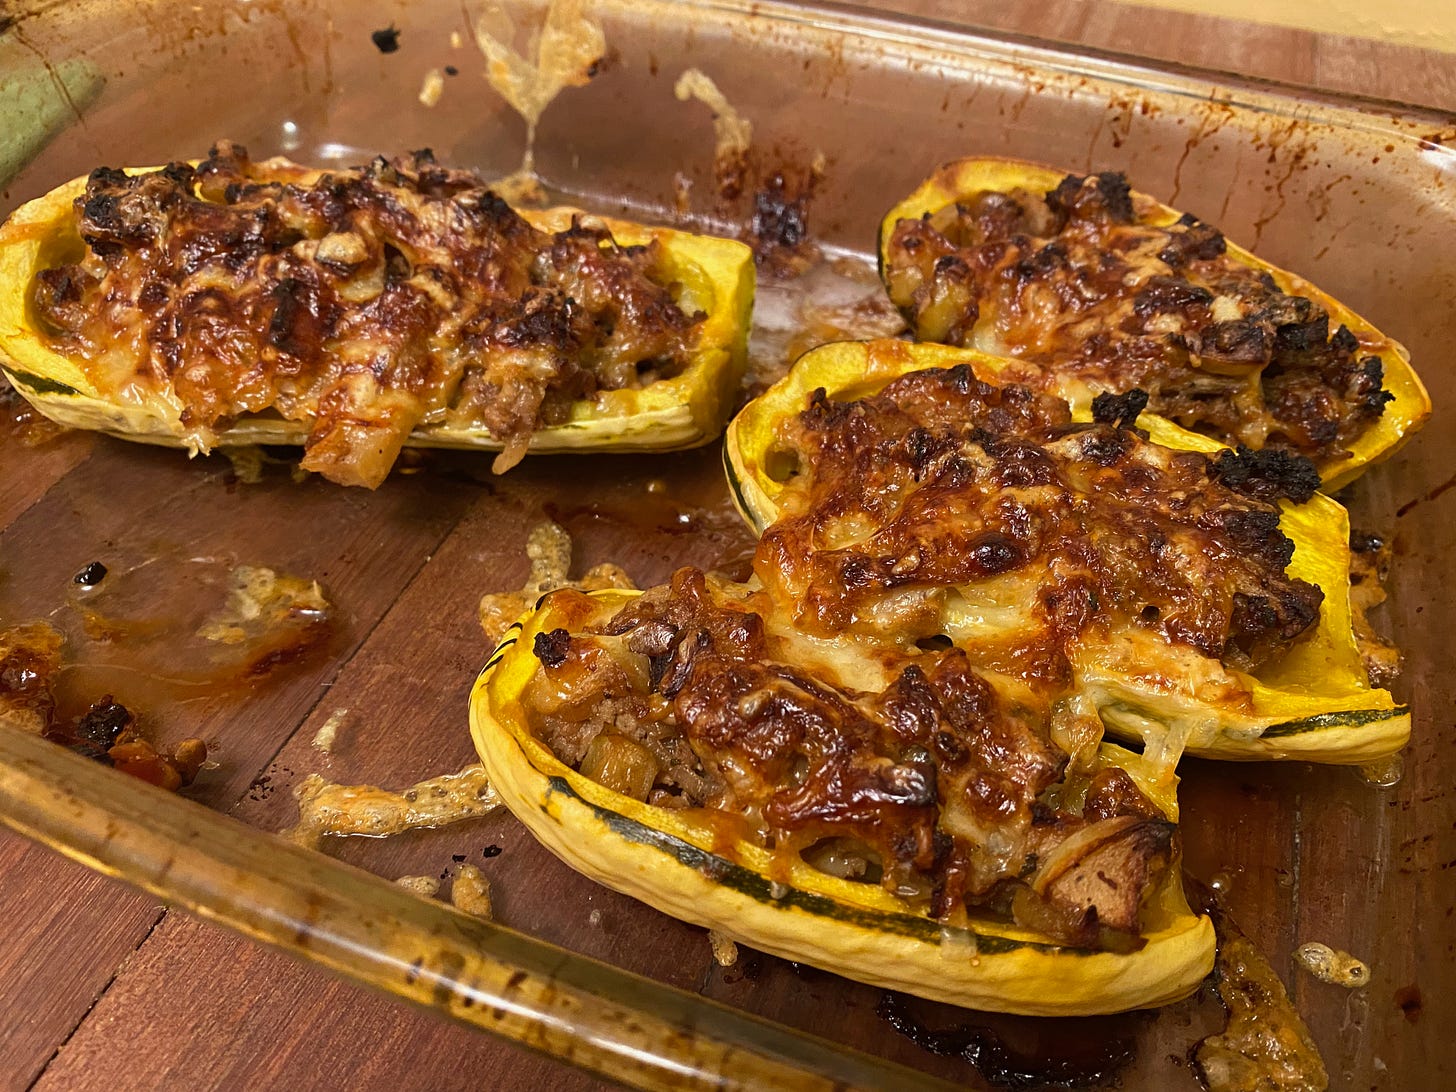 A glass baking dish holds four halves of delicata squash, overflowing with filling and topped browned and bubbly cheese. There is an empty space in the front of the pan where a fifth half used to be.